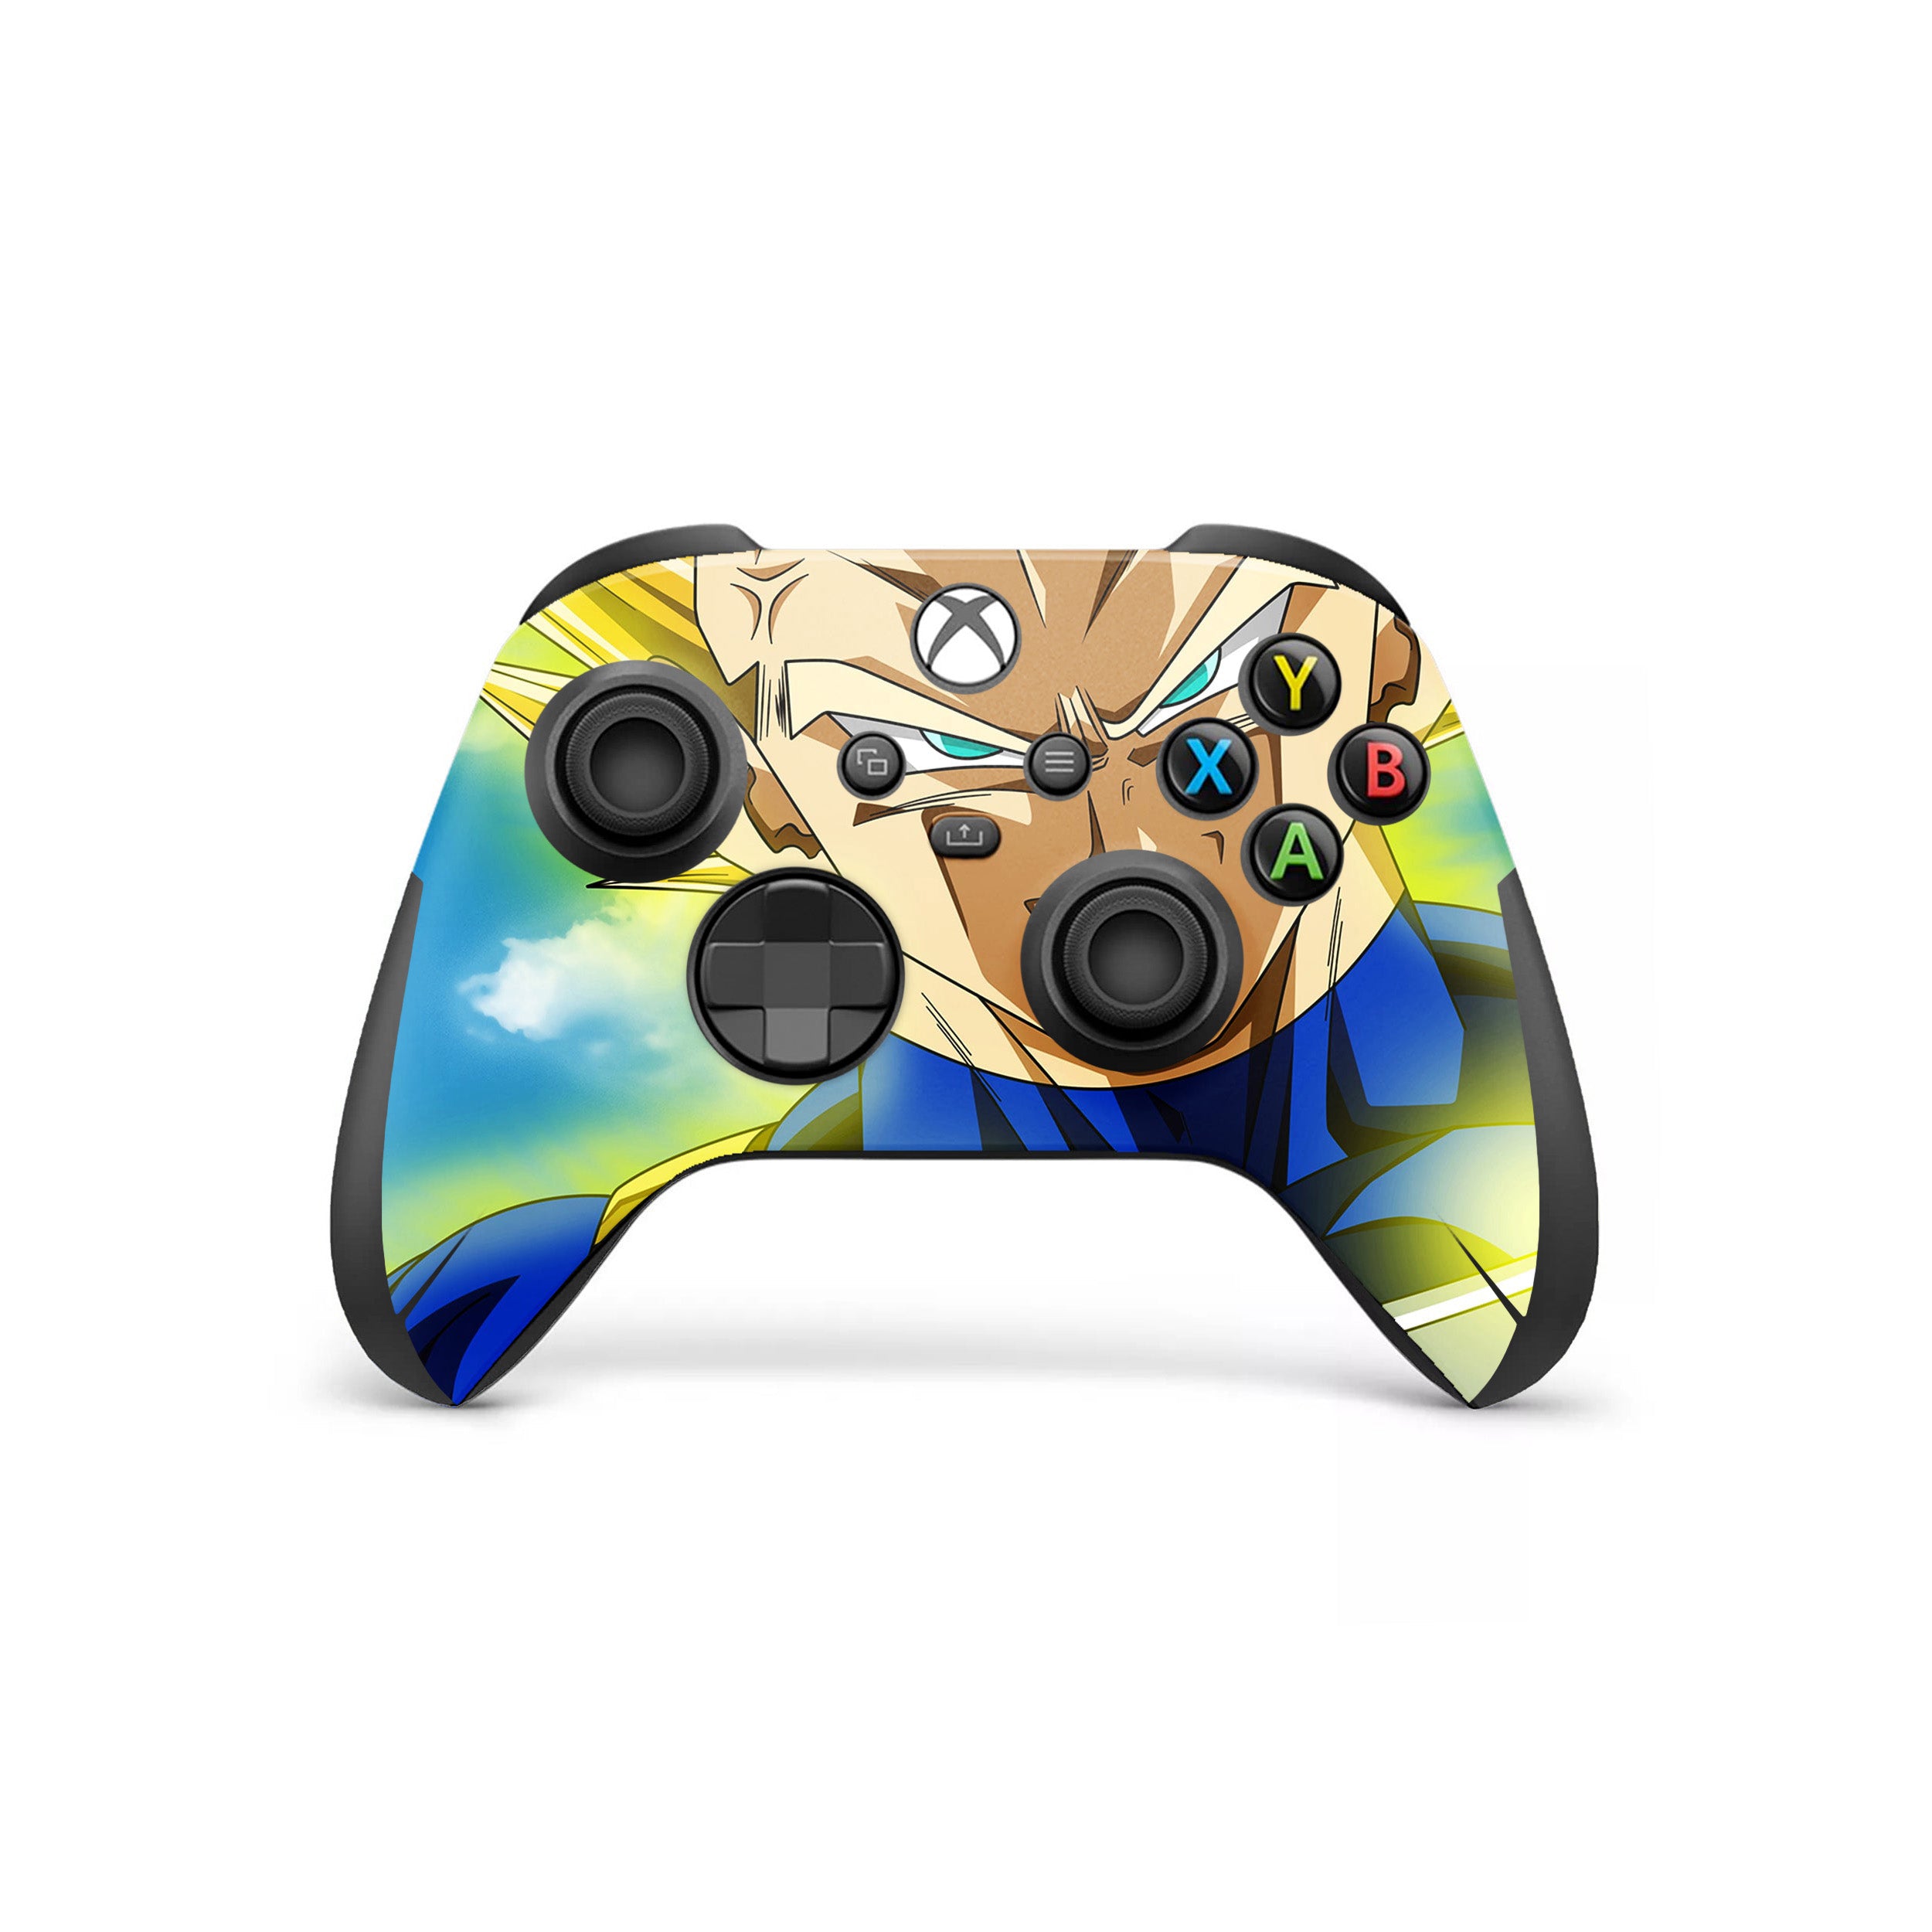 A video game skin featuring a Dragon Ball Z Vegeta design for the Xbox Wireless Controller.